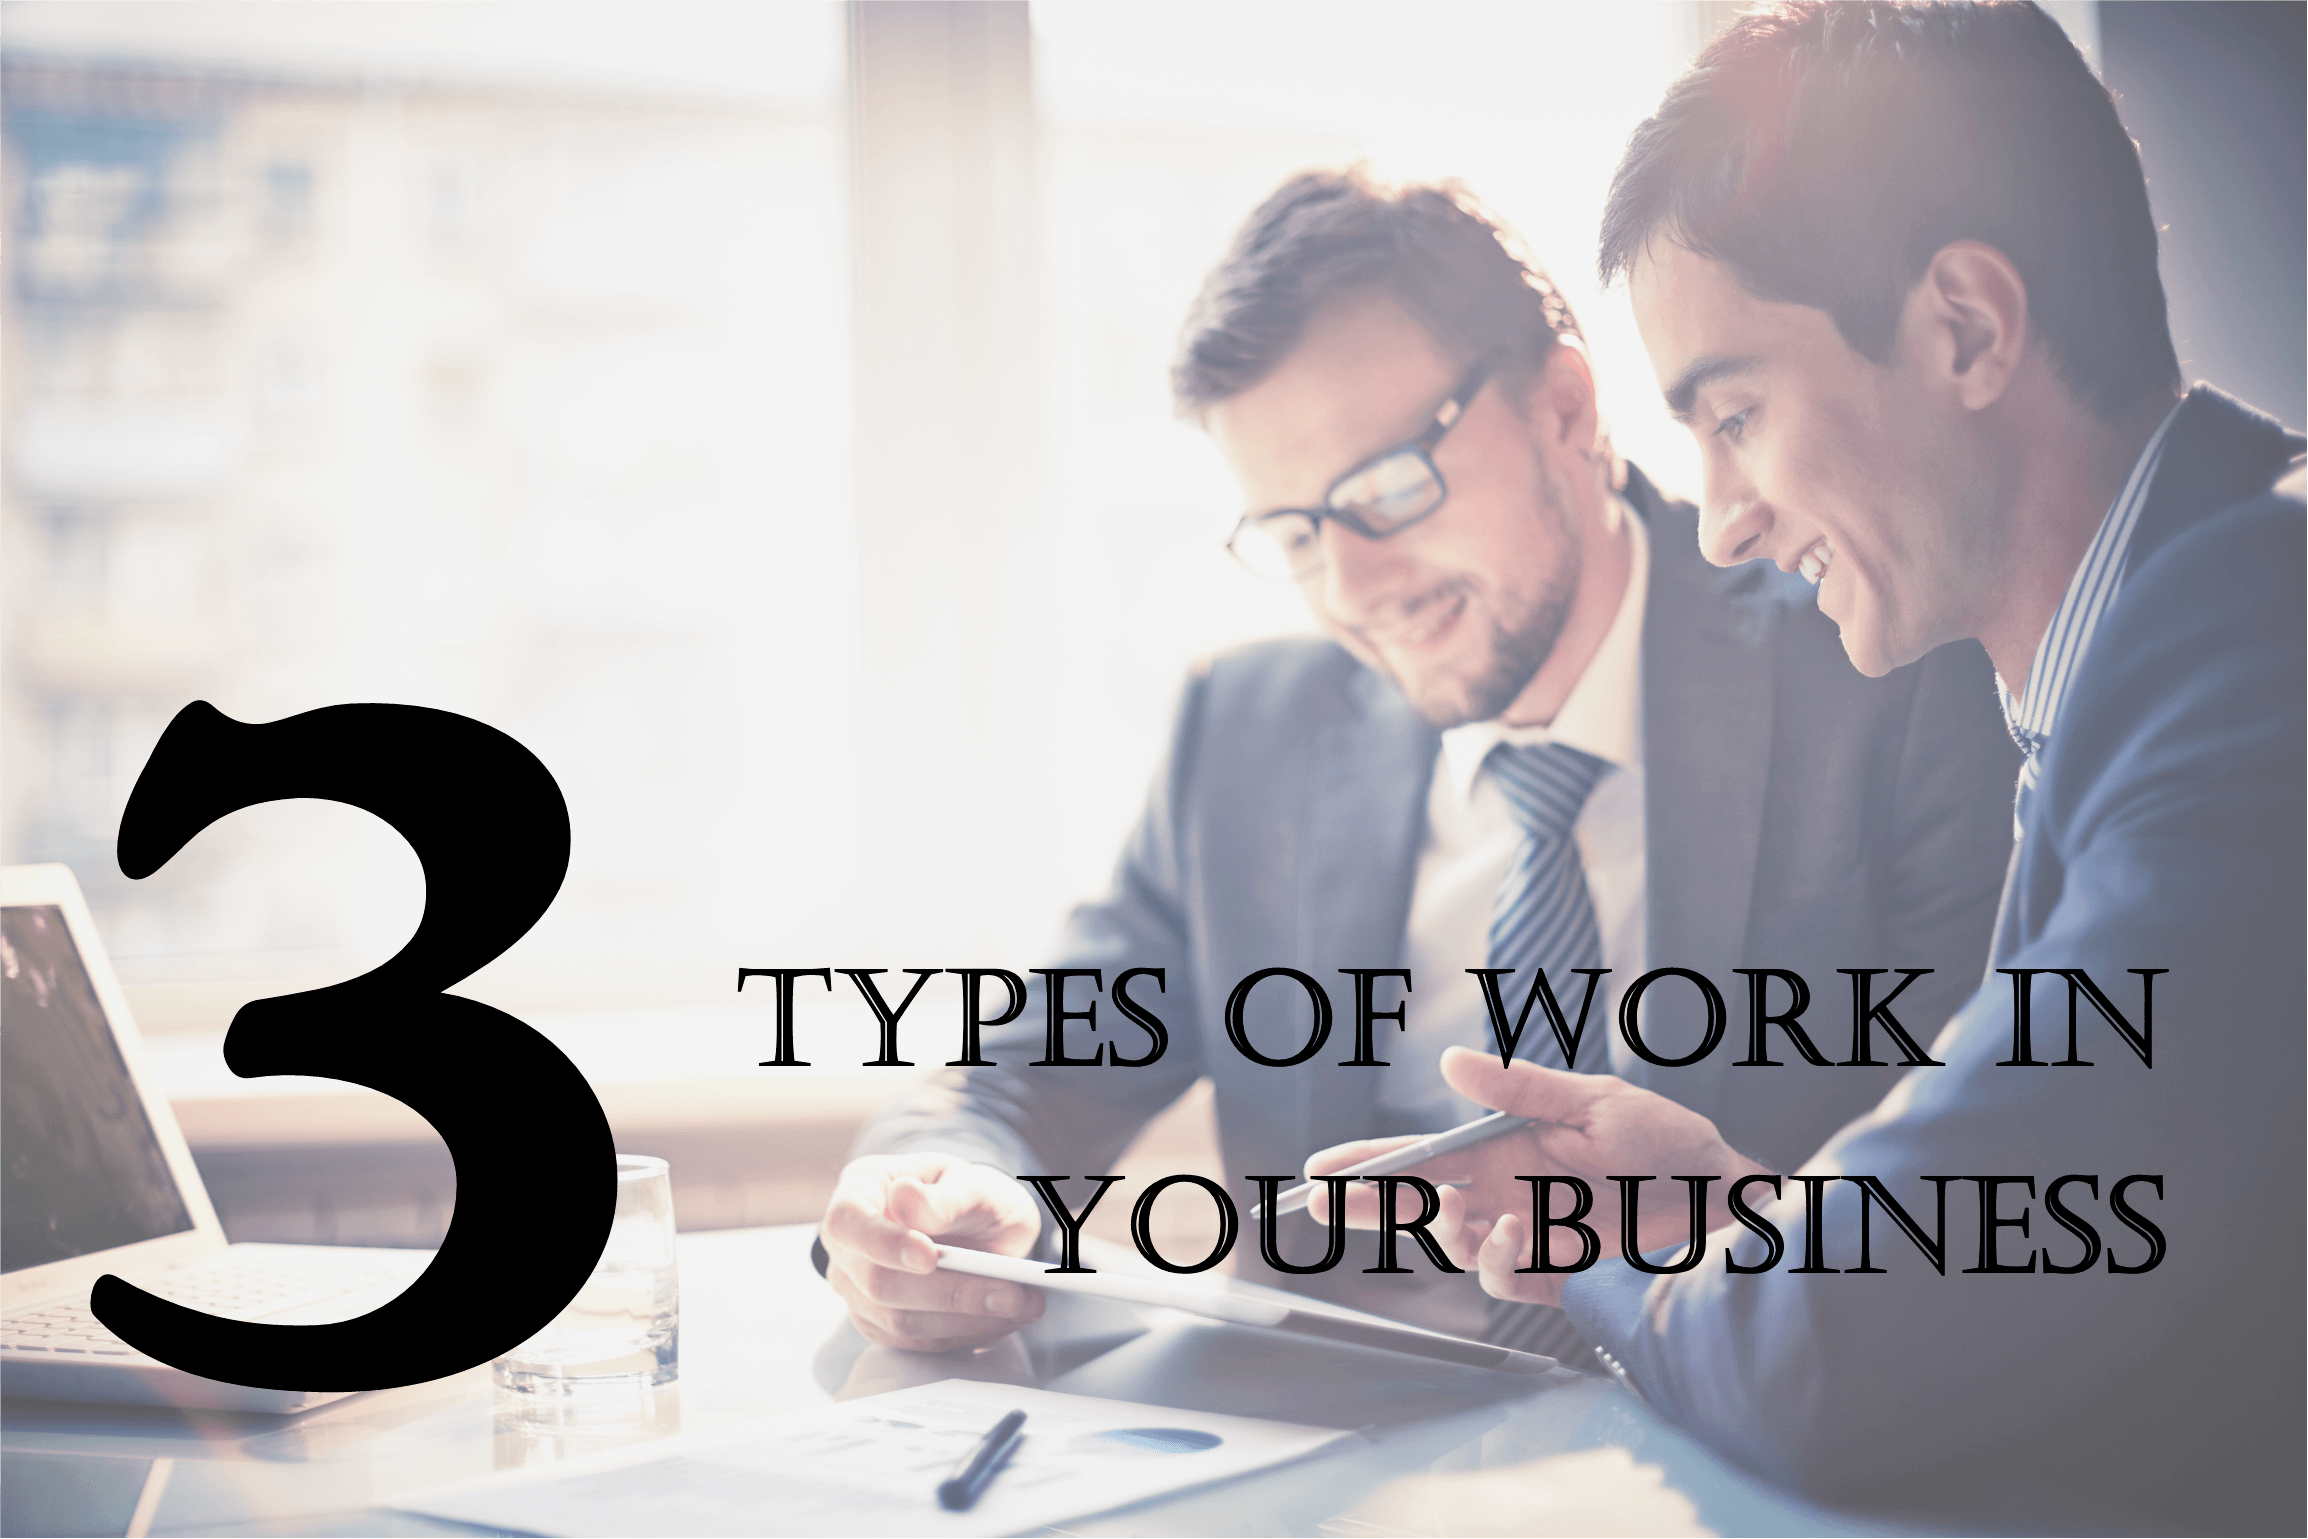 Beskrivning för "There are only three different types of work in your business"